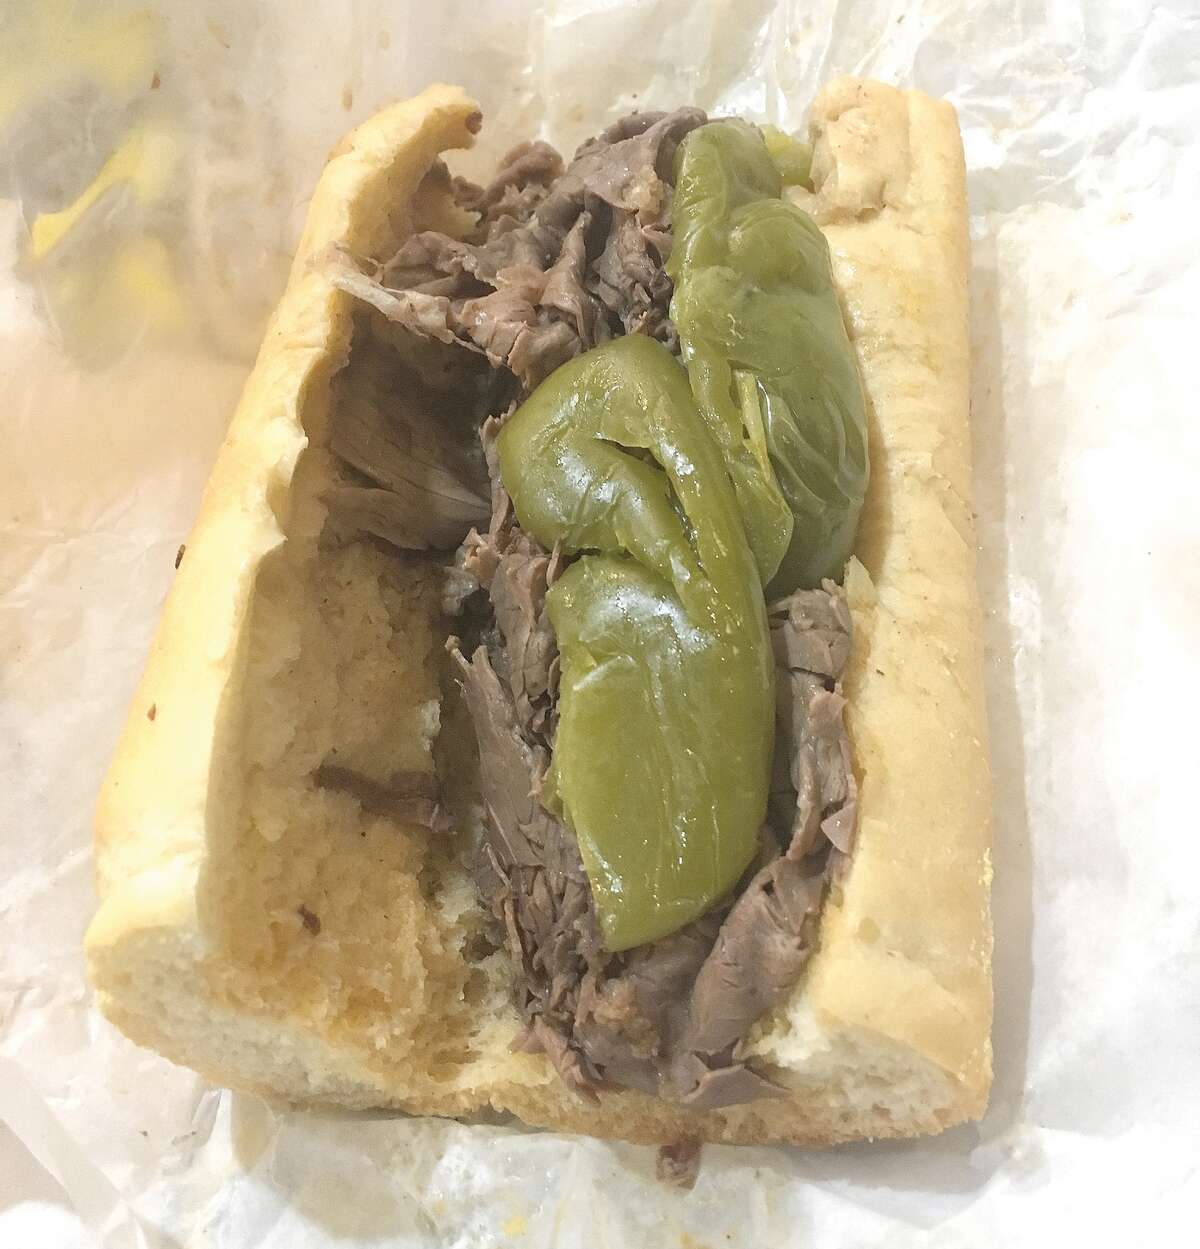 The regular beef served dry with sweet peppers at Al’s Italian Beef.